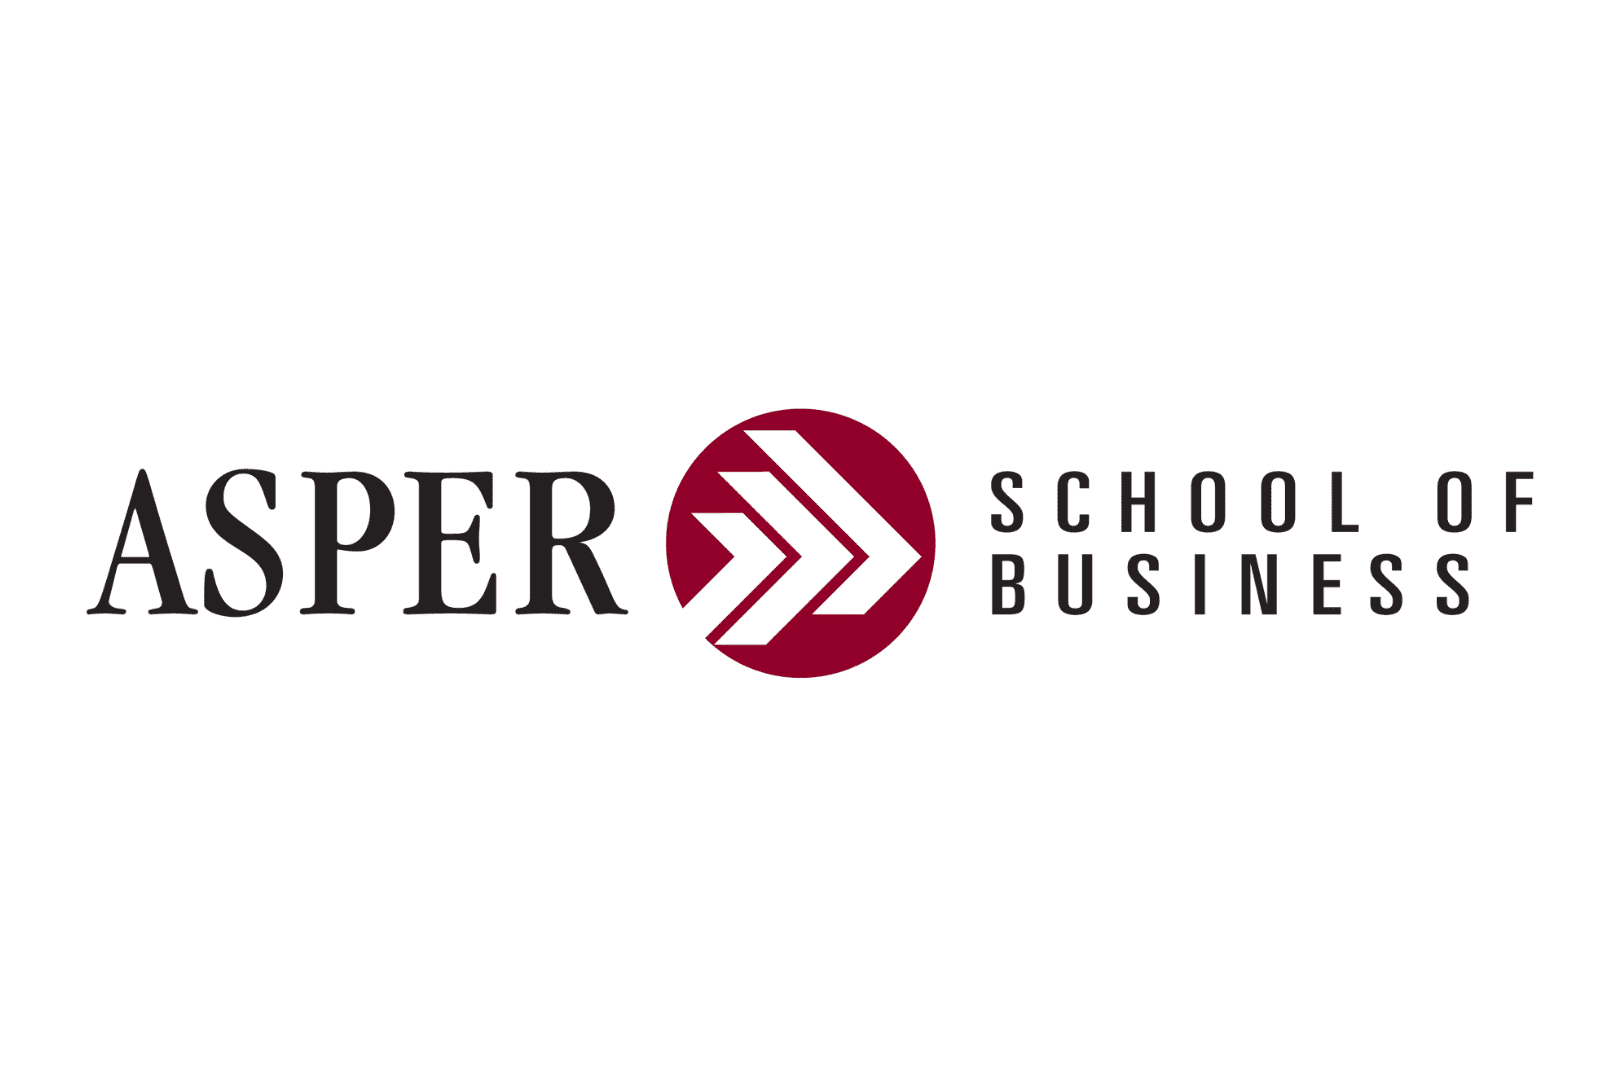 Asper School of Business Logo for Partners Section About Us (1)